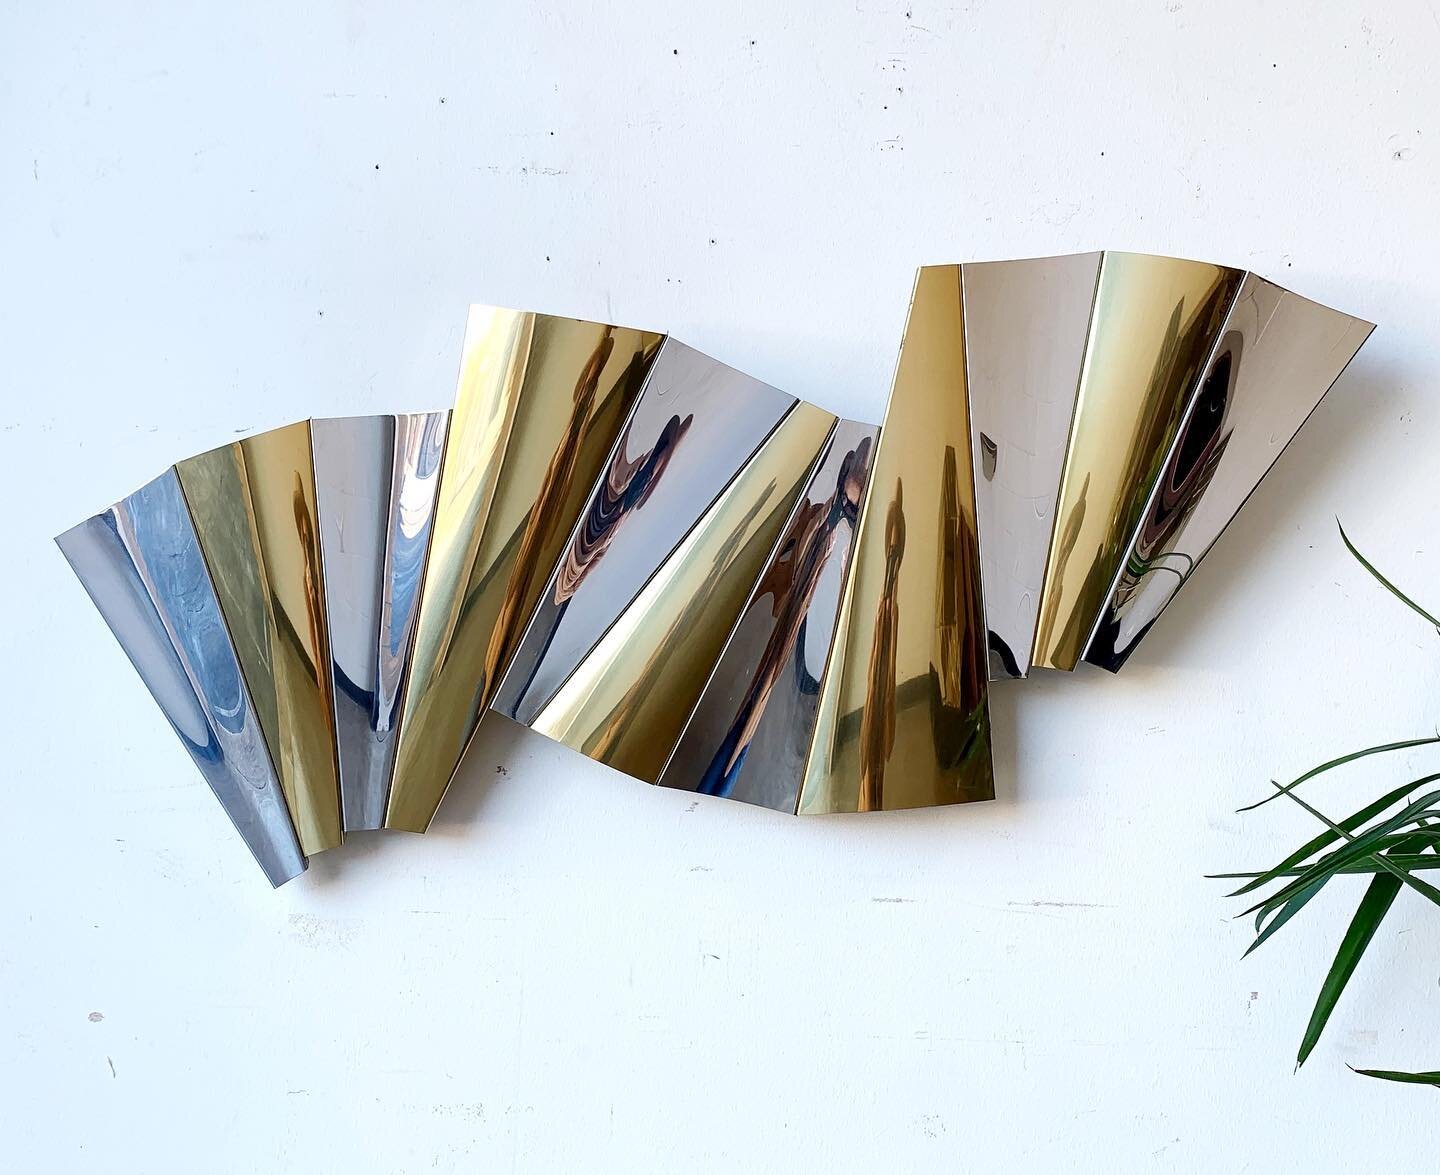 Curtis Jere in Da House! 🙌

SOLD / 1985 Curtis Jere Abstract Wave Ribbon Sculpture! Comprised of alternating concave and convex brass + chrome triangles. It can be hung in any orientation - diagonal, horizontal or vertical. Total eye candy to add to